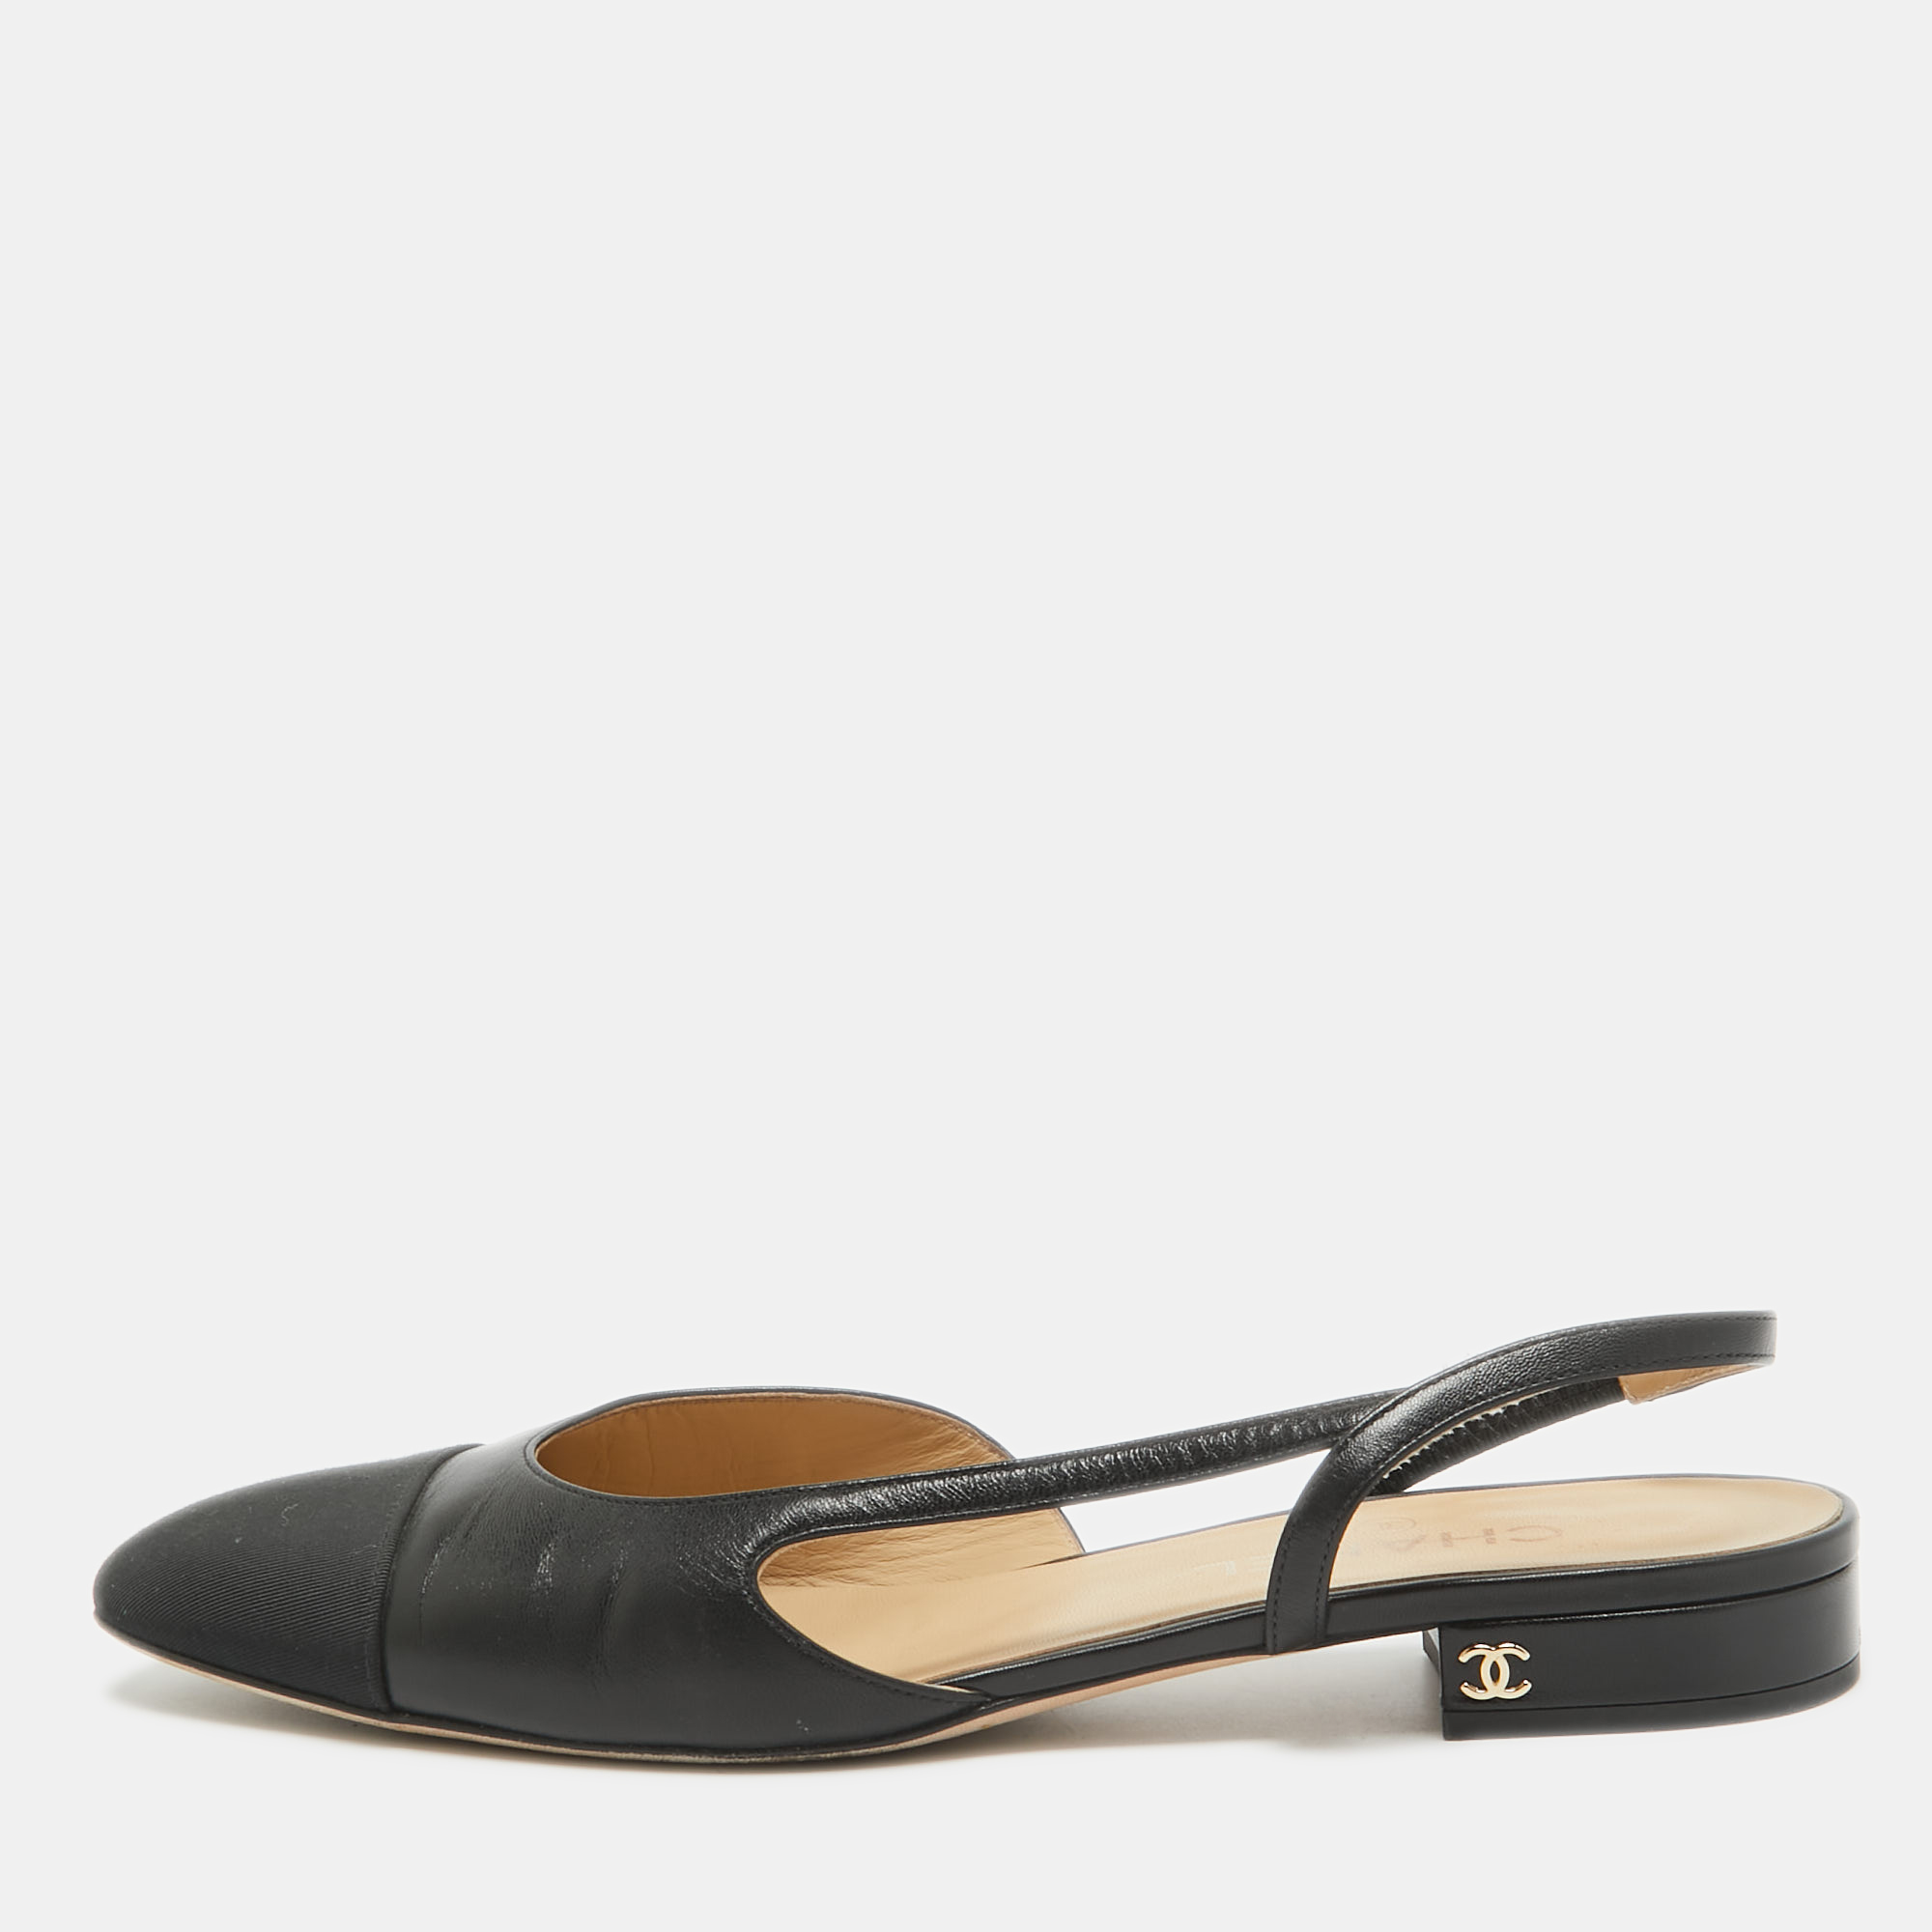 

Chanel Black Leather and Grosgrain Cap Toe Slingback Flats Size